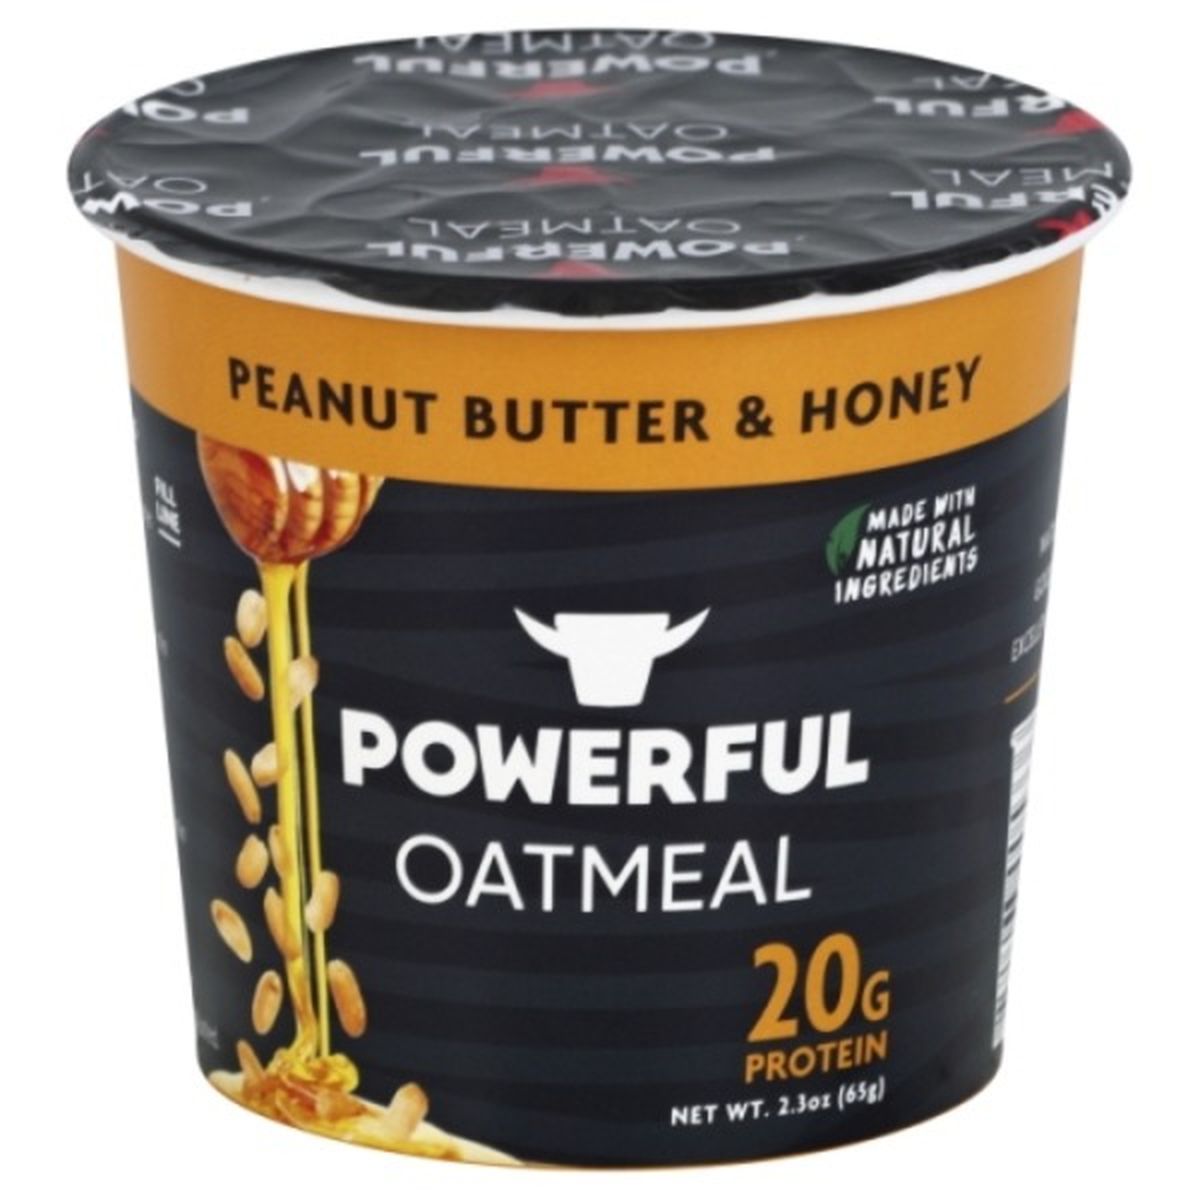 Calories in Powerful Nutrition Oatmeal, Peanut Butter & Honey